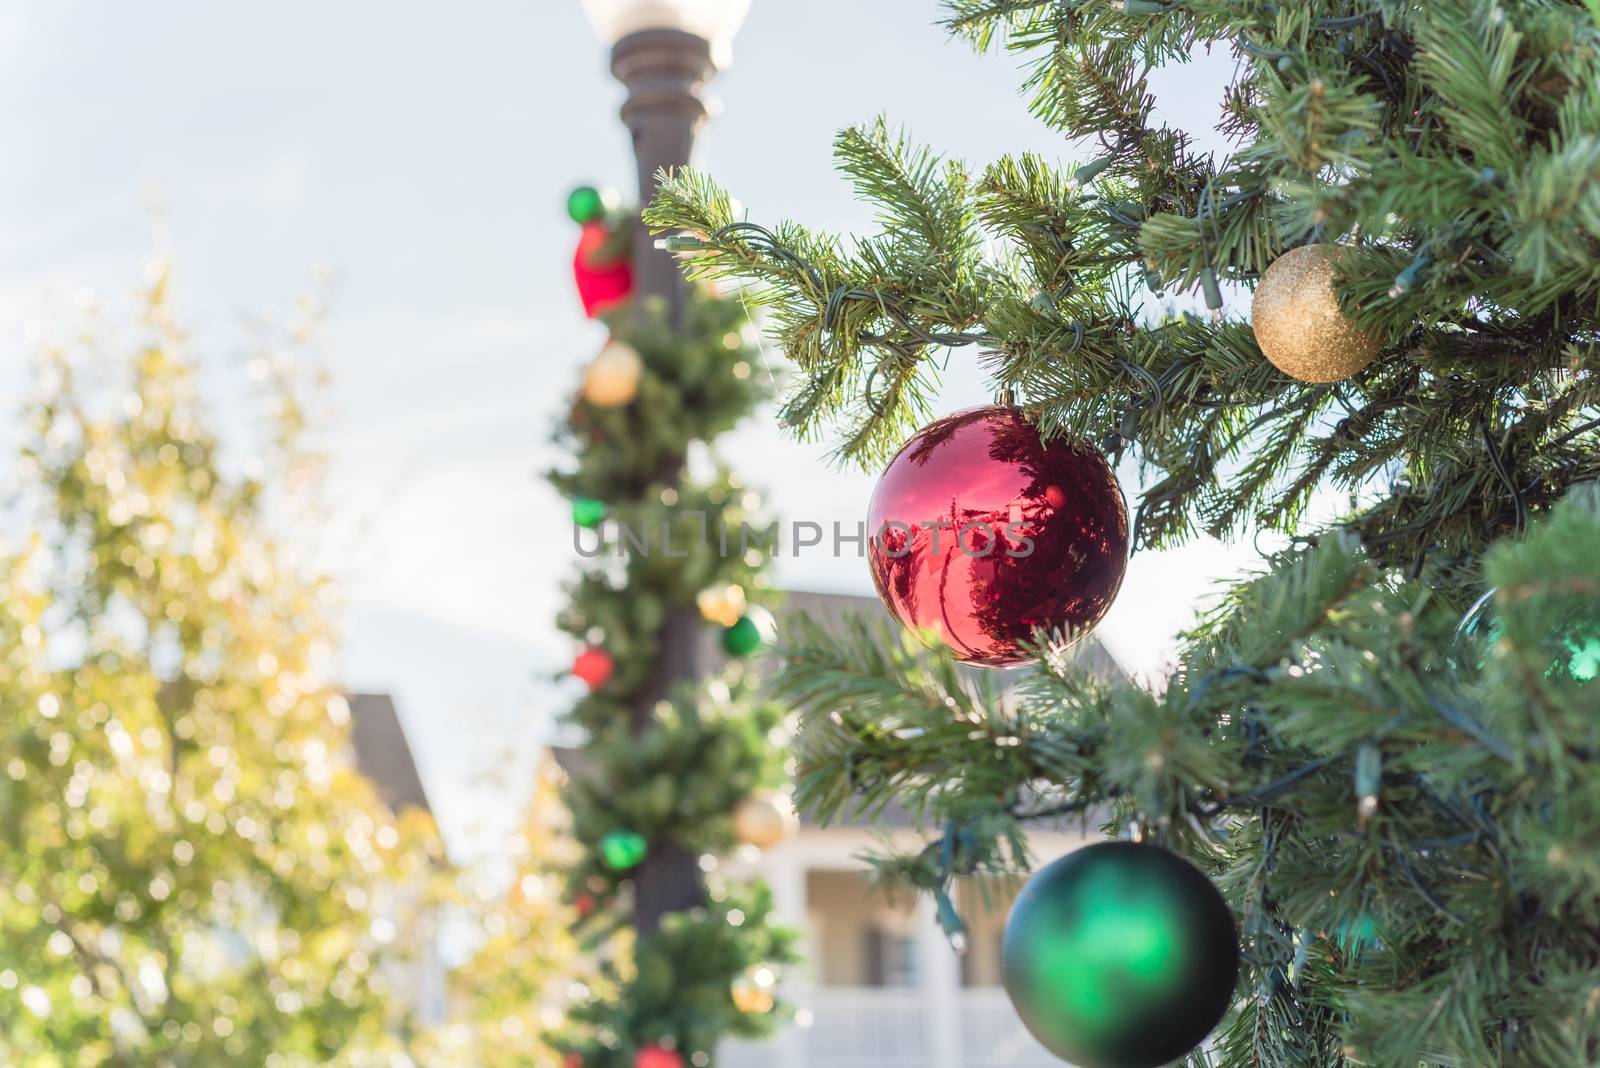 Christmas ball ornament hanging on pine branches under sunny blue sky near Dallas, Texas by trongnguyen